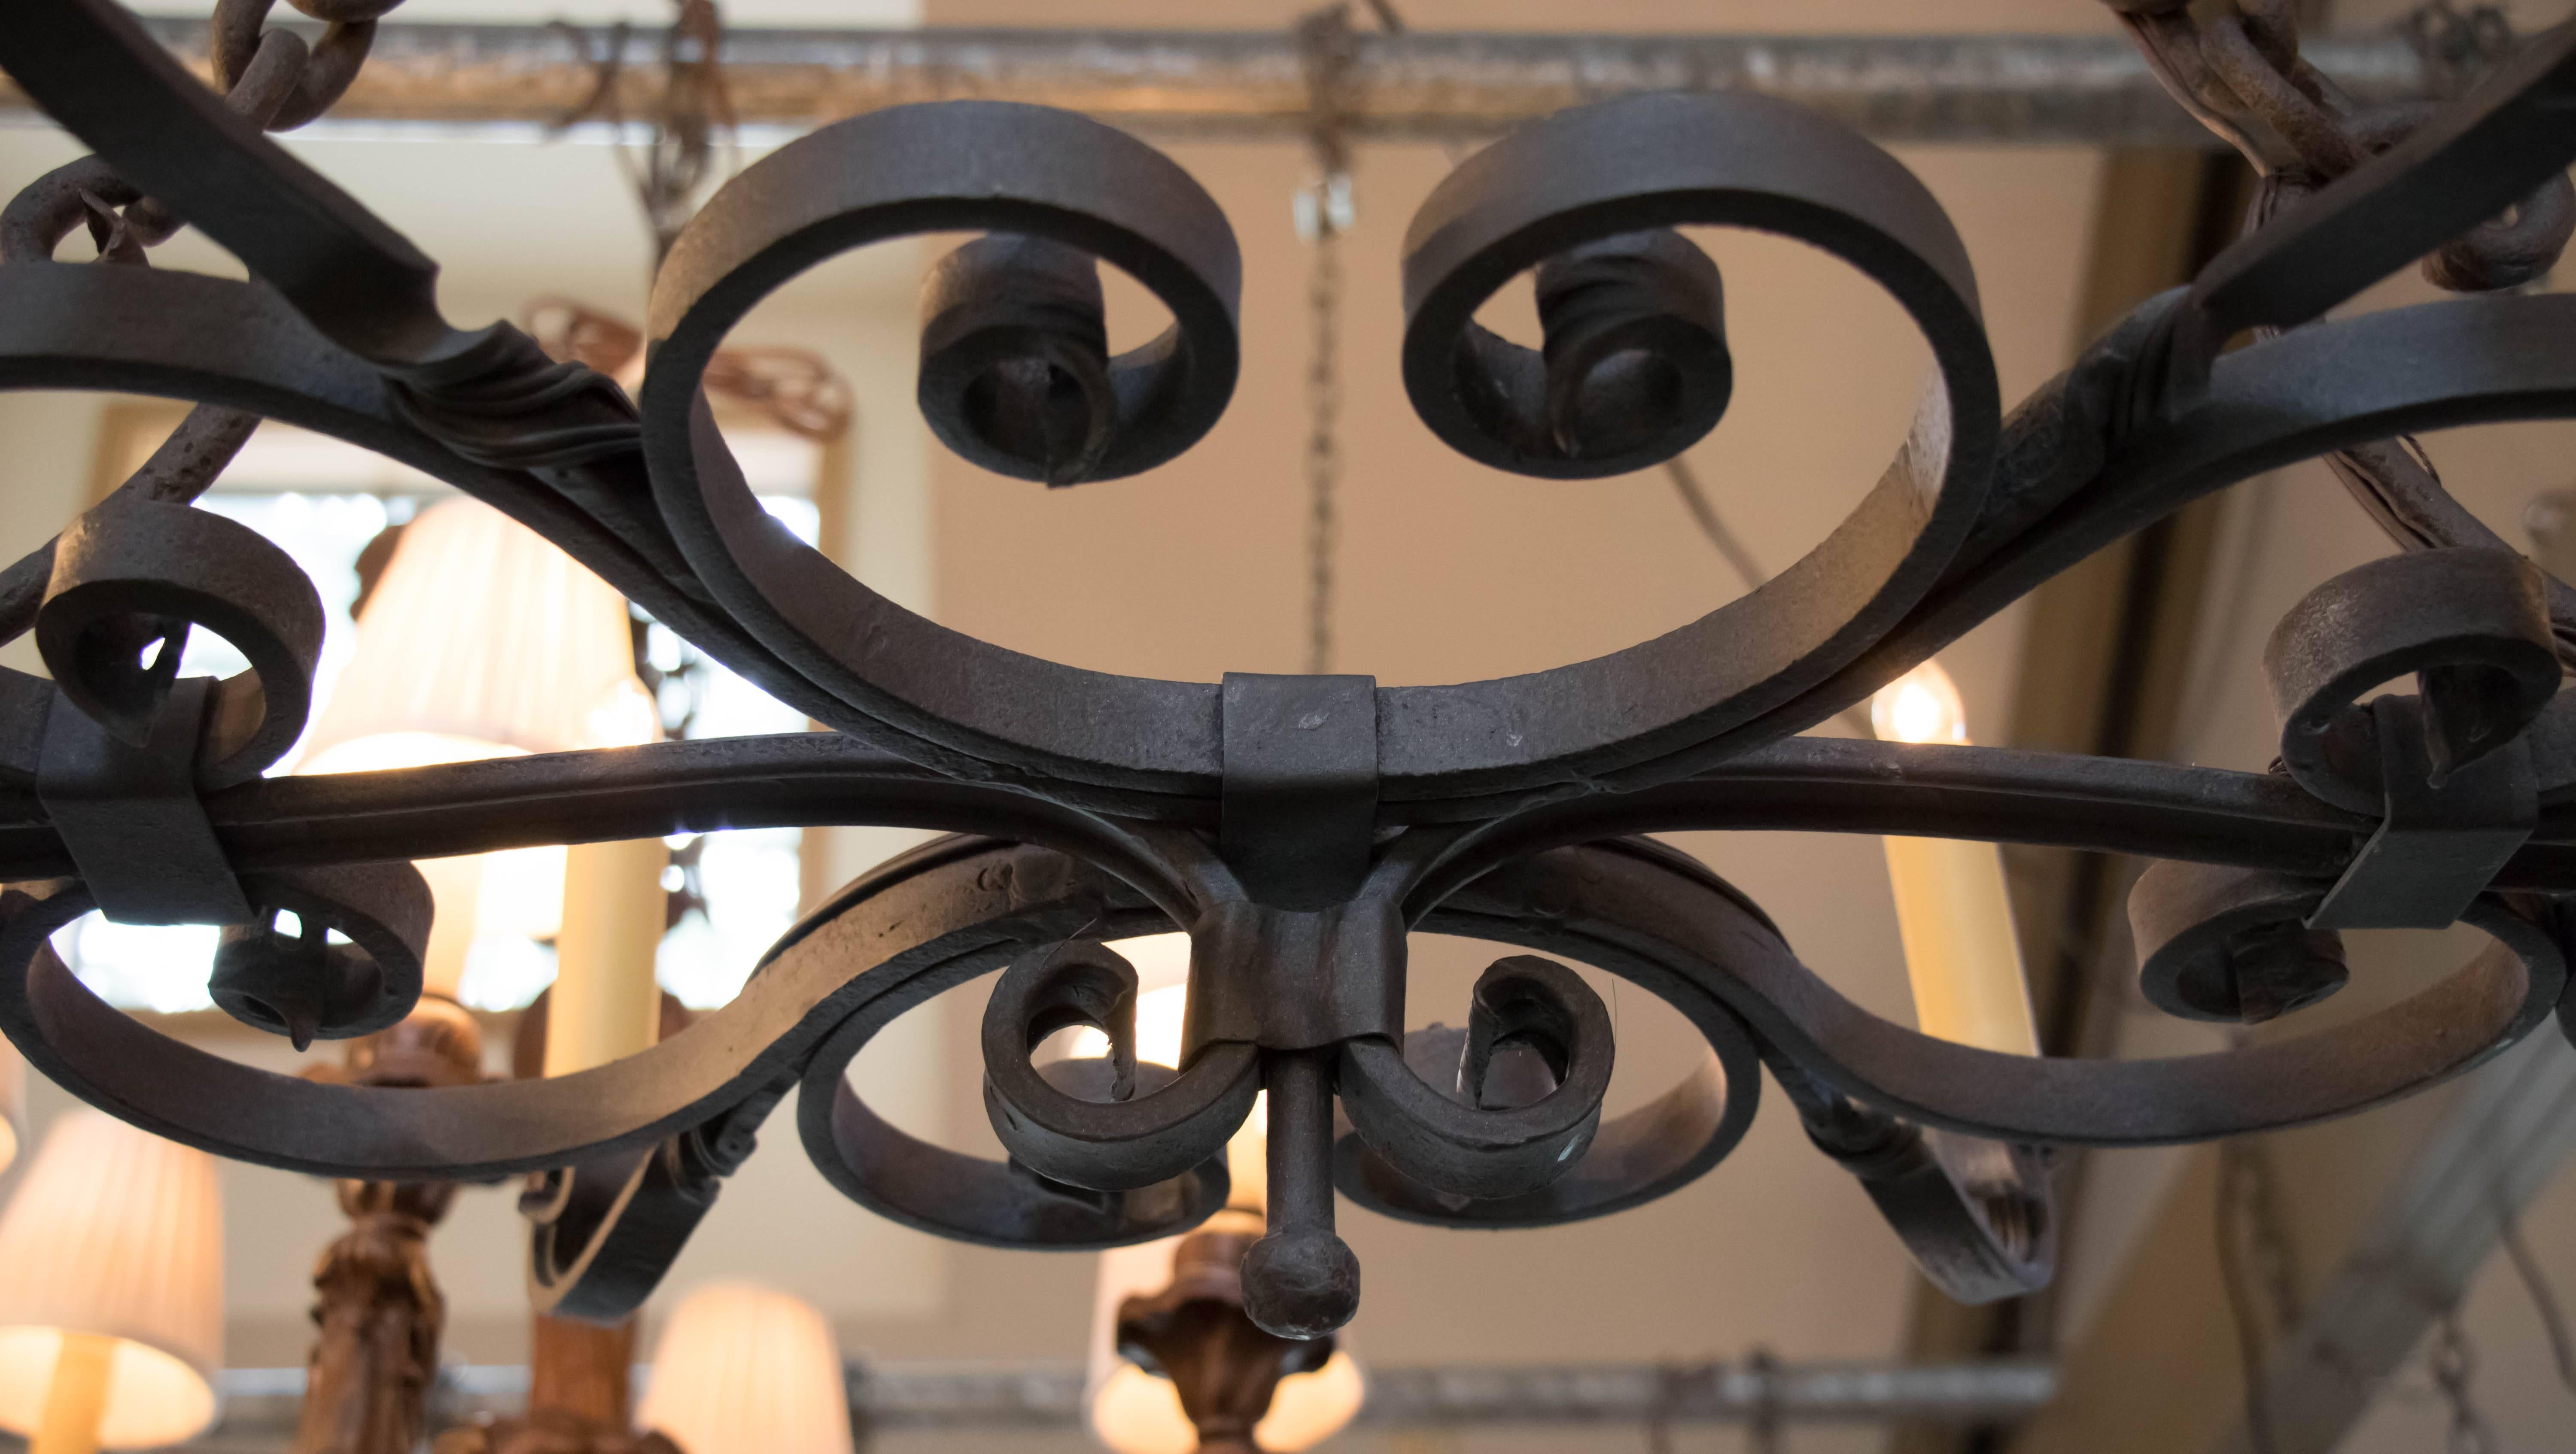 Heavy hand-forged east-west iron chandelier from Spain, circa 1930. Expert craftsmanship with wonderful attention to detail on the ironwork. Newly wired in the US with all UL listed parts and six candelabra sockets. Would be great over a kitchen